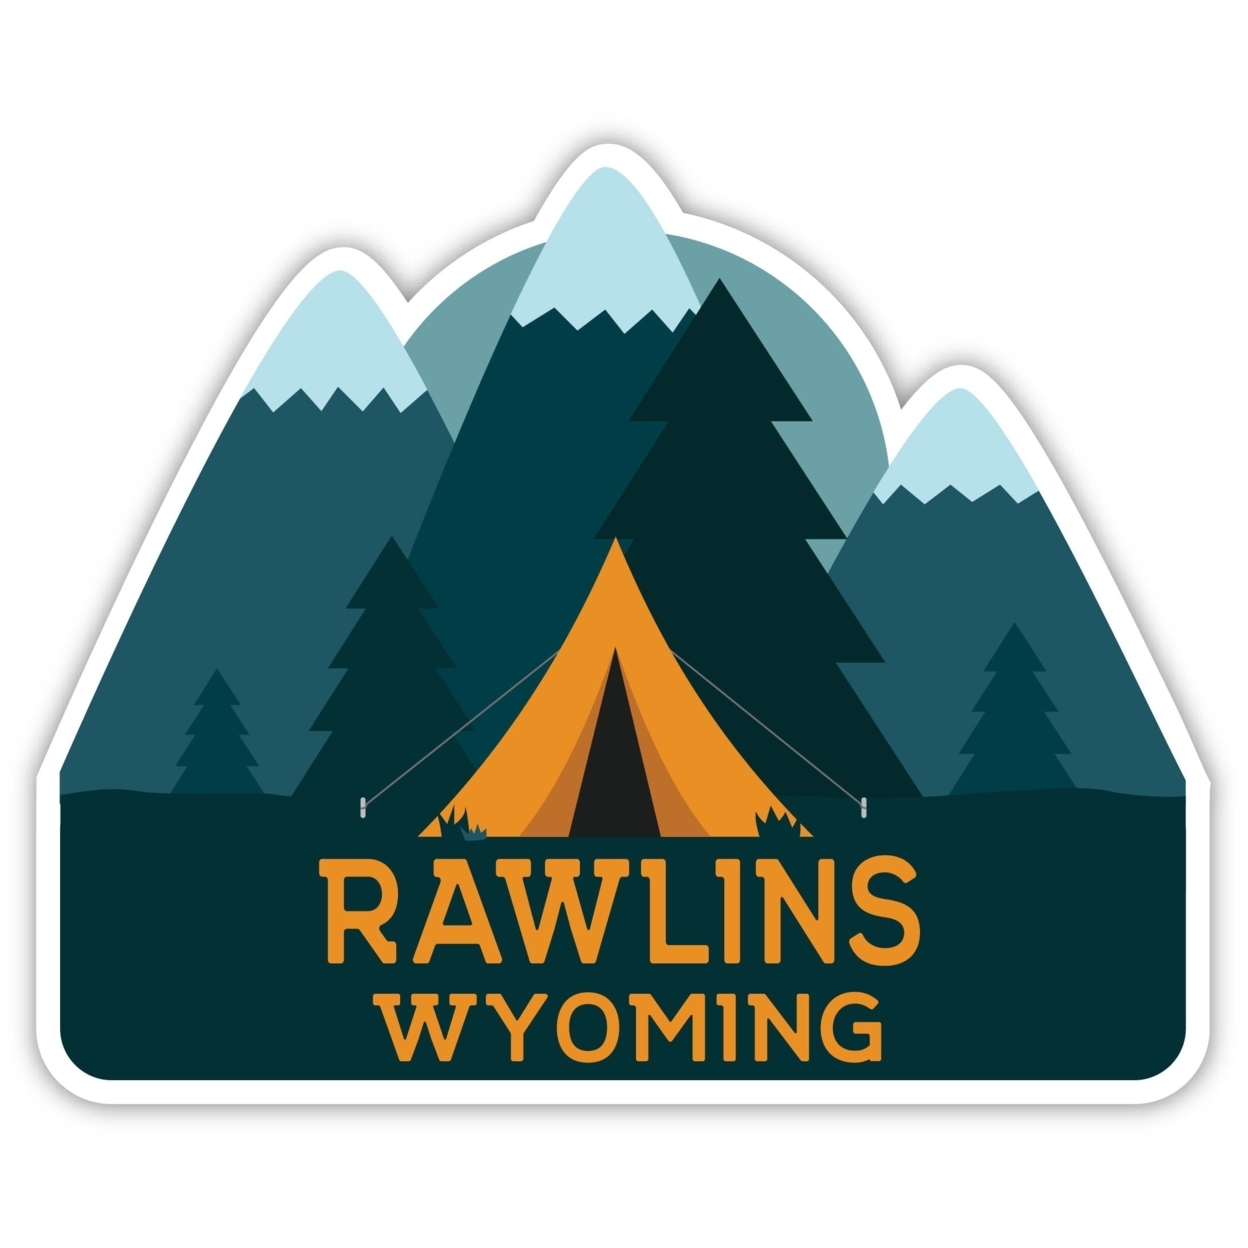 Rawlins Wyoming Souvenir Decorative Stickers (Choose Theme And Size) - Single Unit, 4-Inch, Tent